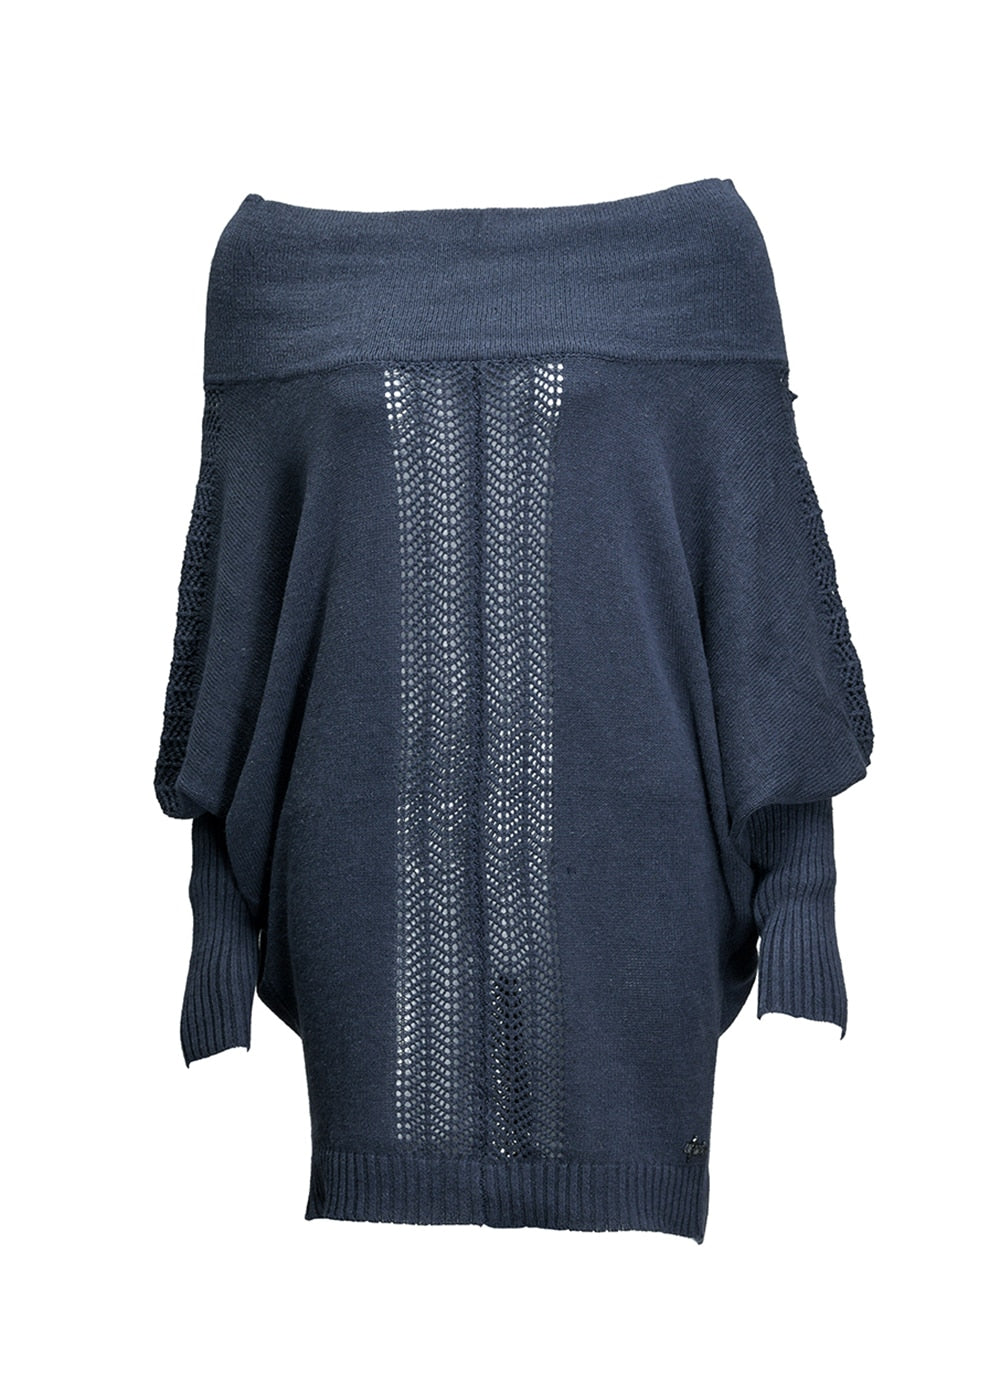 Nomads Hemp Wear Stargazer Sweater made from hemp and organic cotton in blue, womens ethical sustainable fashion brand australia at Tantrika